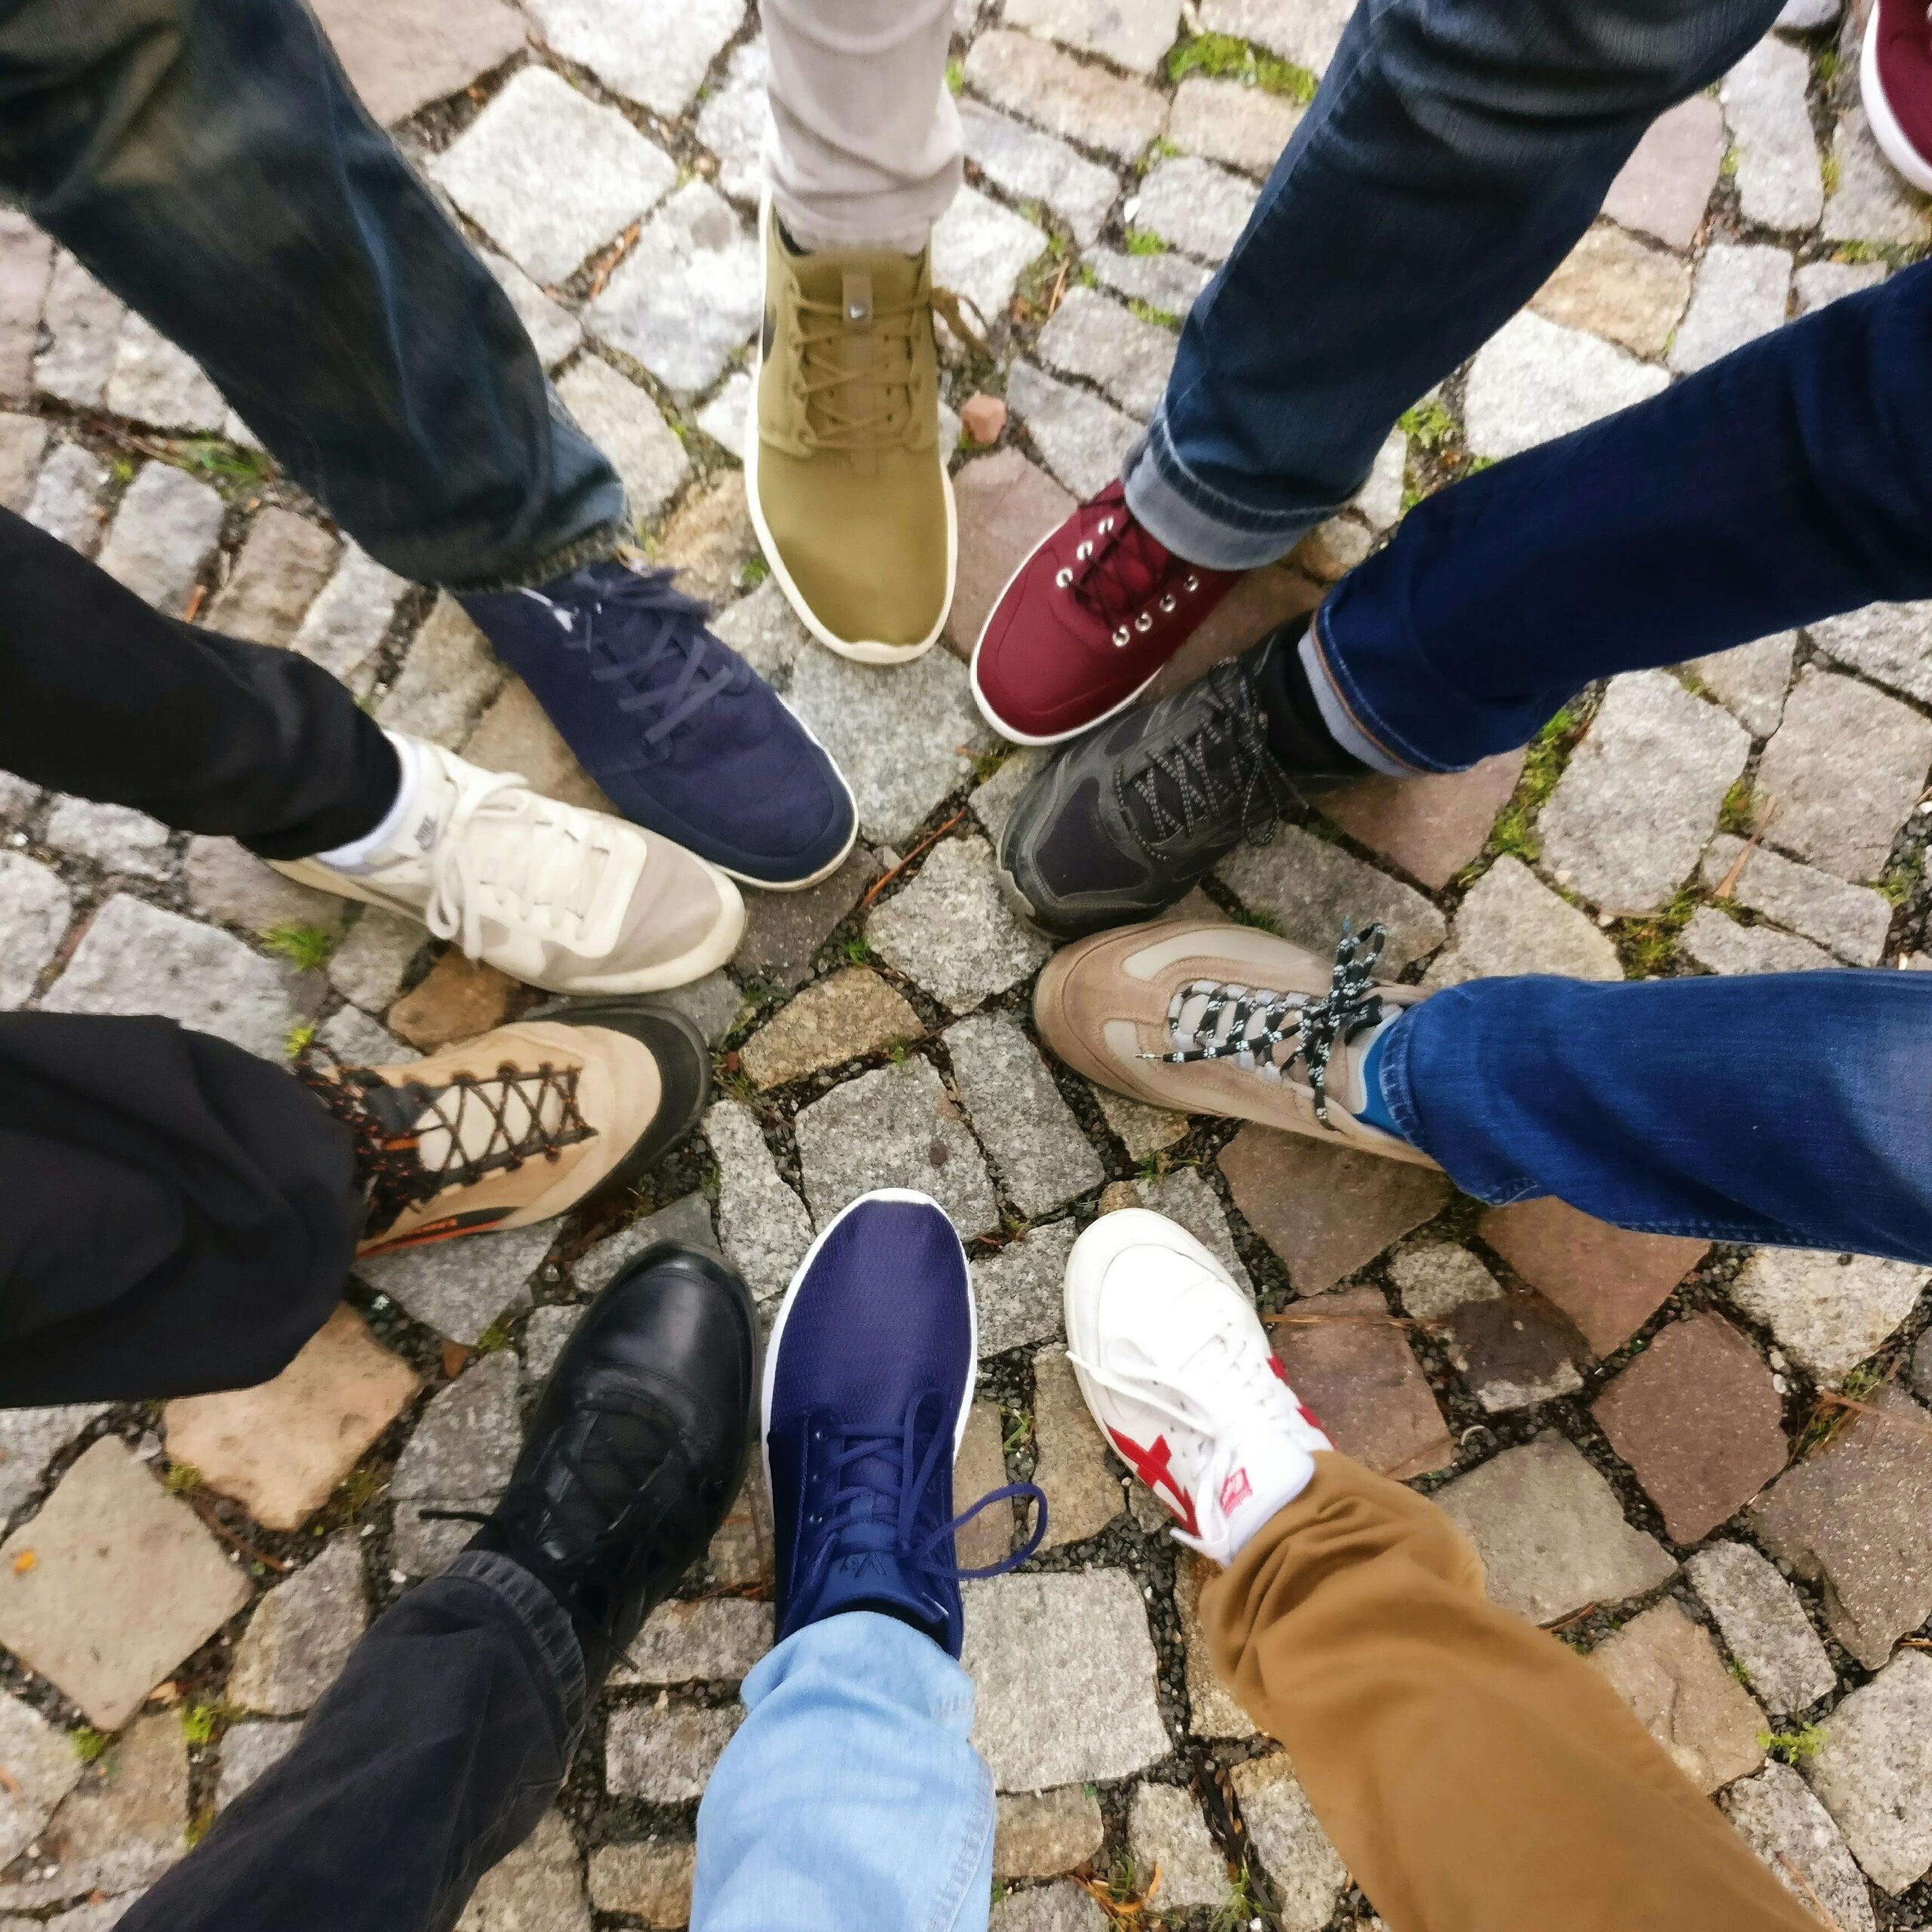 bible verses about community (group of people standing with their shoes in the center)